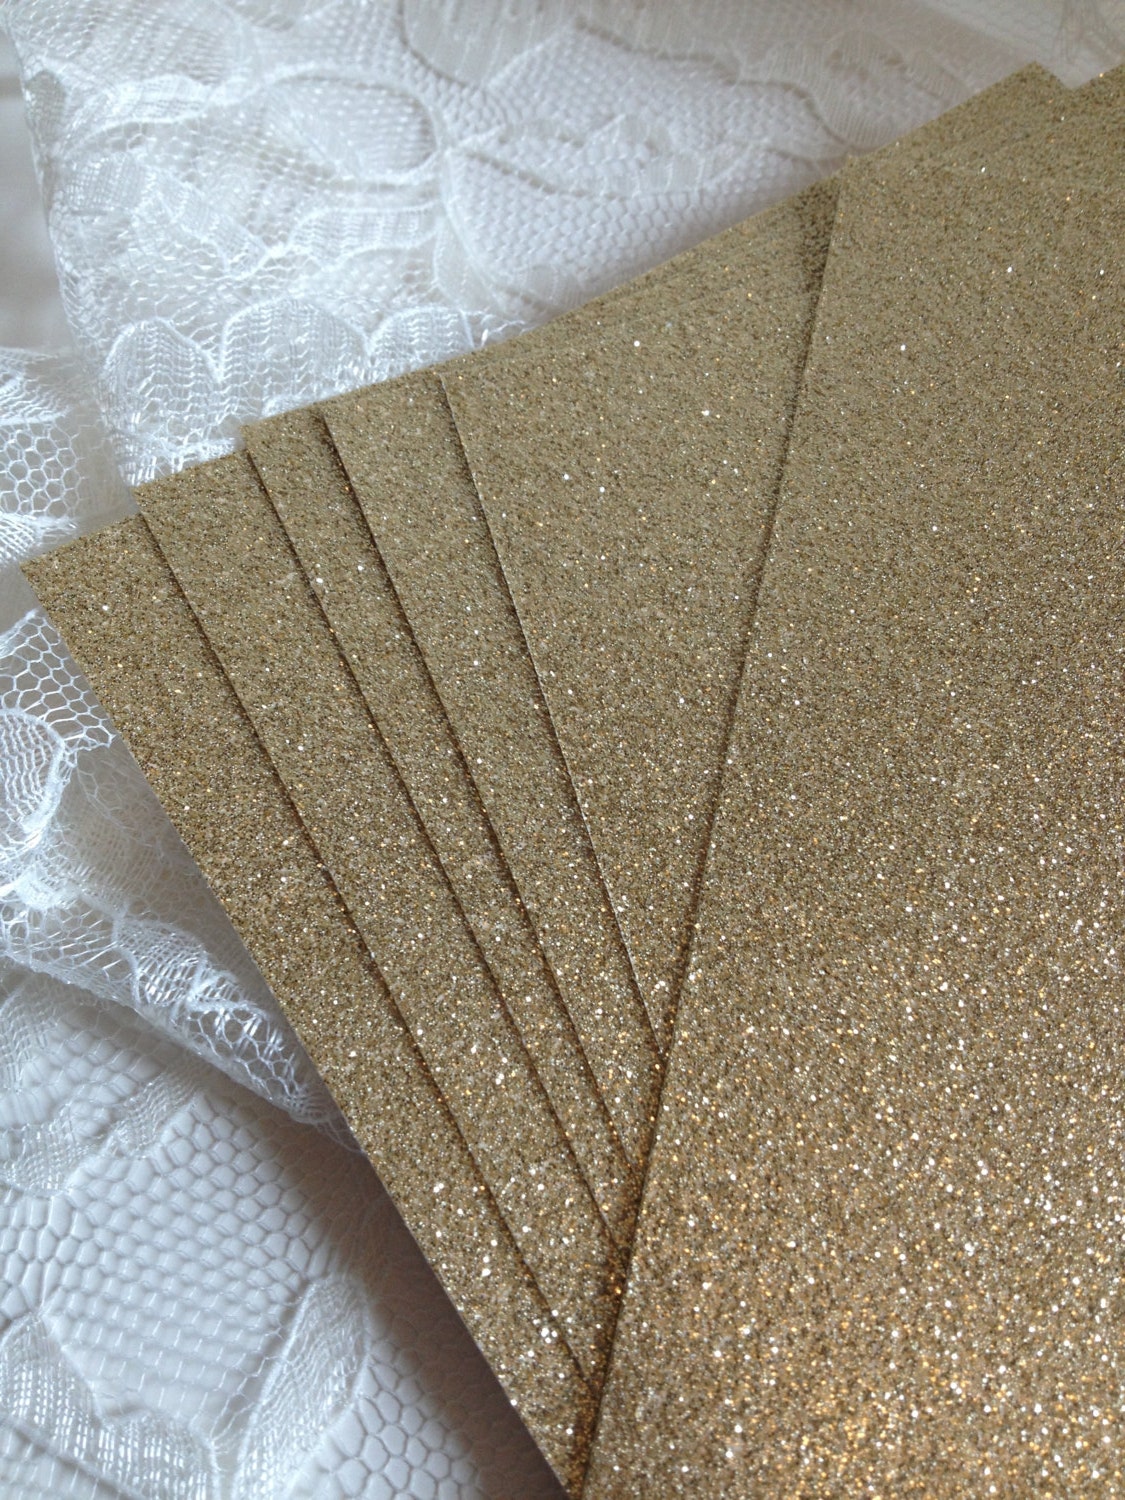 Glitter Cardstock Paper A4, 20 Sheets Creative Colored Shimmer Sparkly  Paper Thin Craft Cardstock Paper for DIY Party Graduation Decor, Birthday  Party